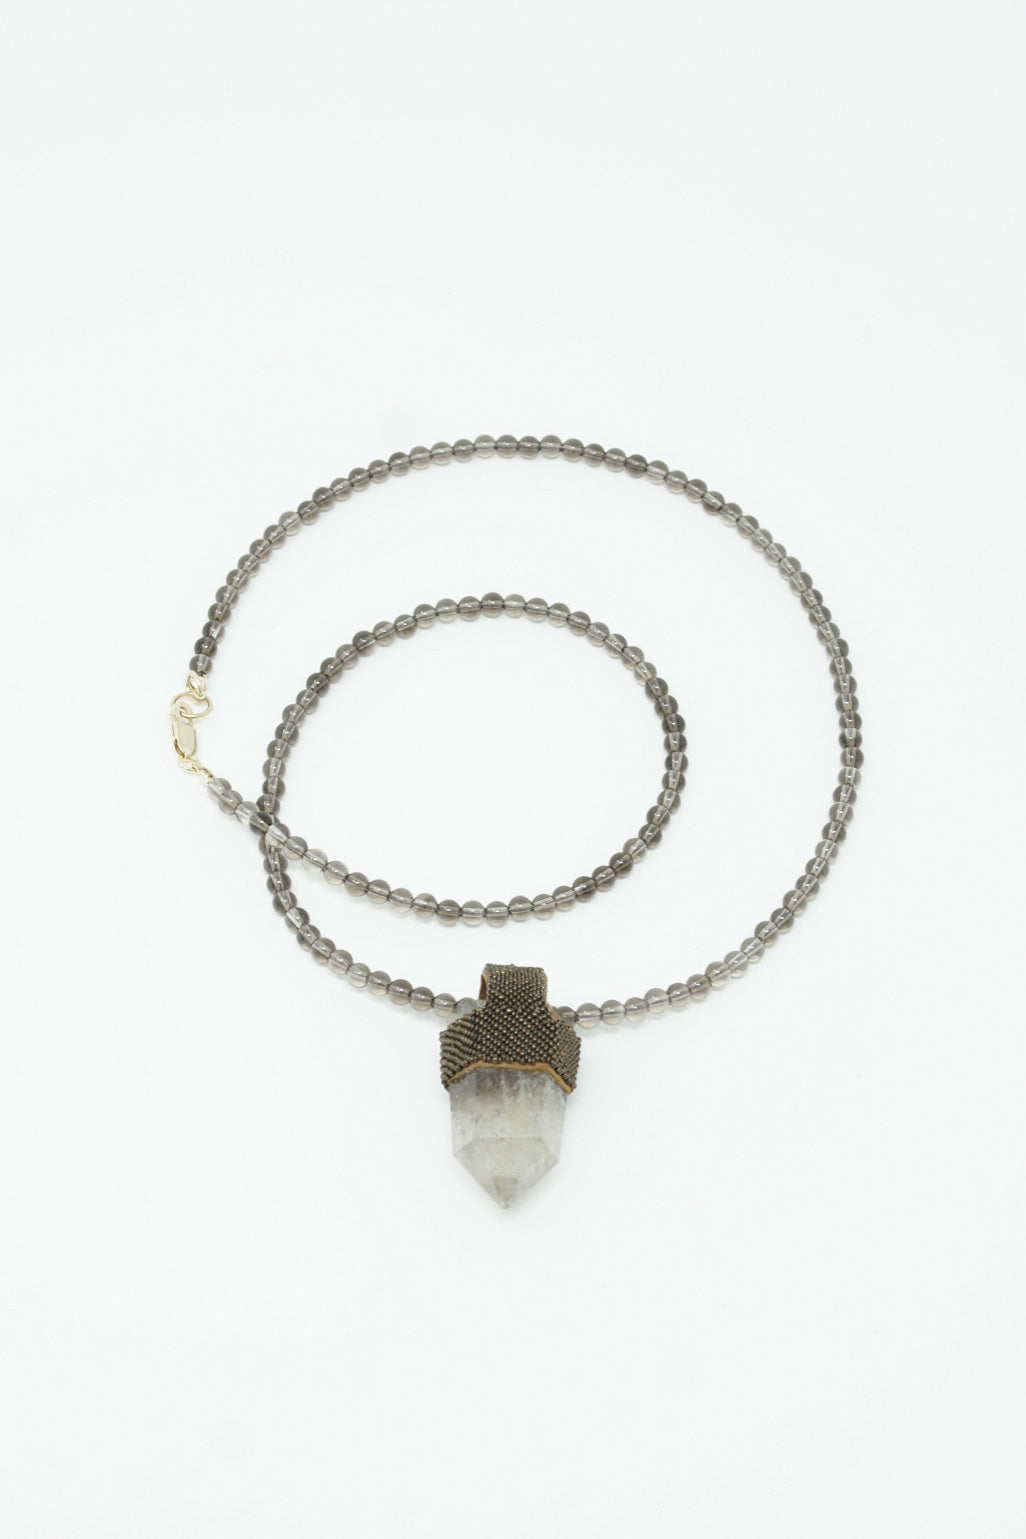 A Robin Mollicone Long Pendulum Necklace in Smoky Quartz Beads Brown, Citrine Crystal and a silver chain.